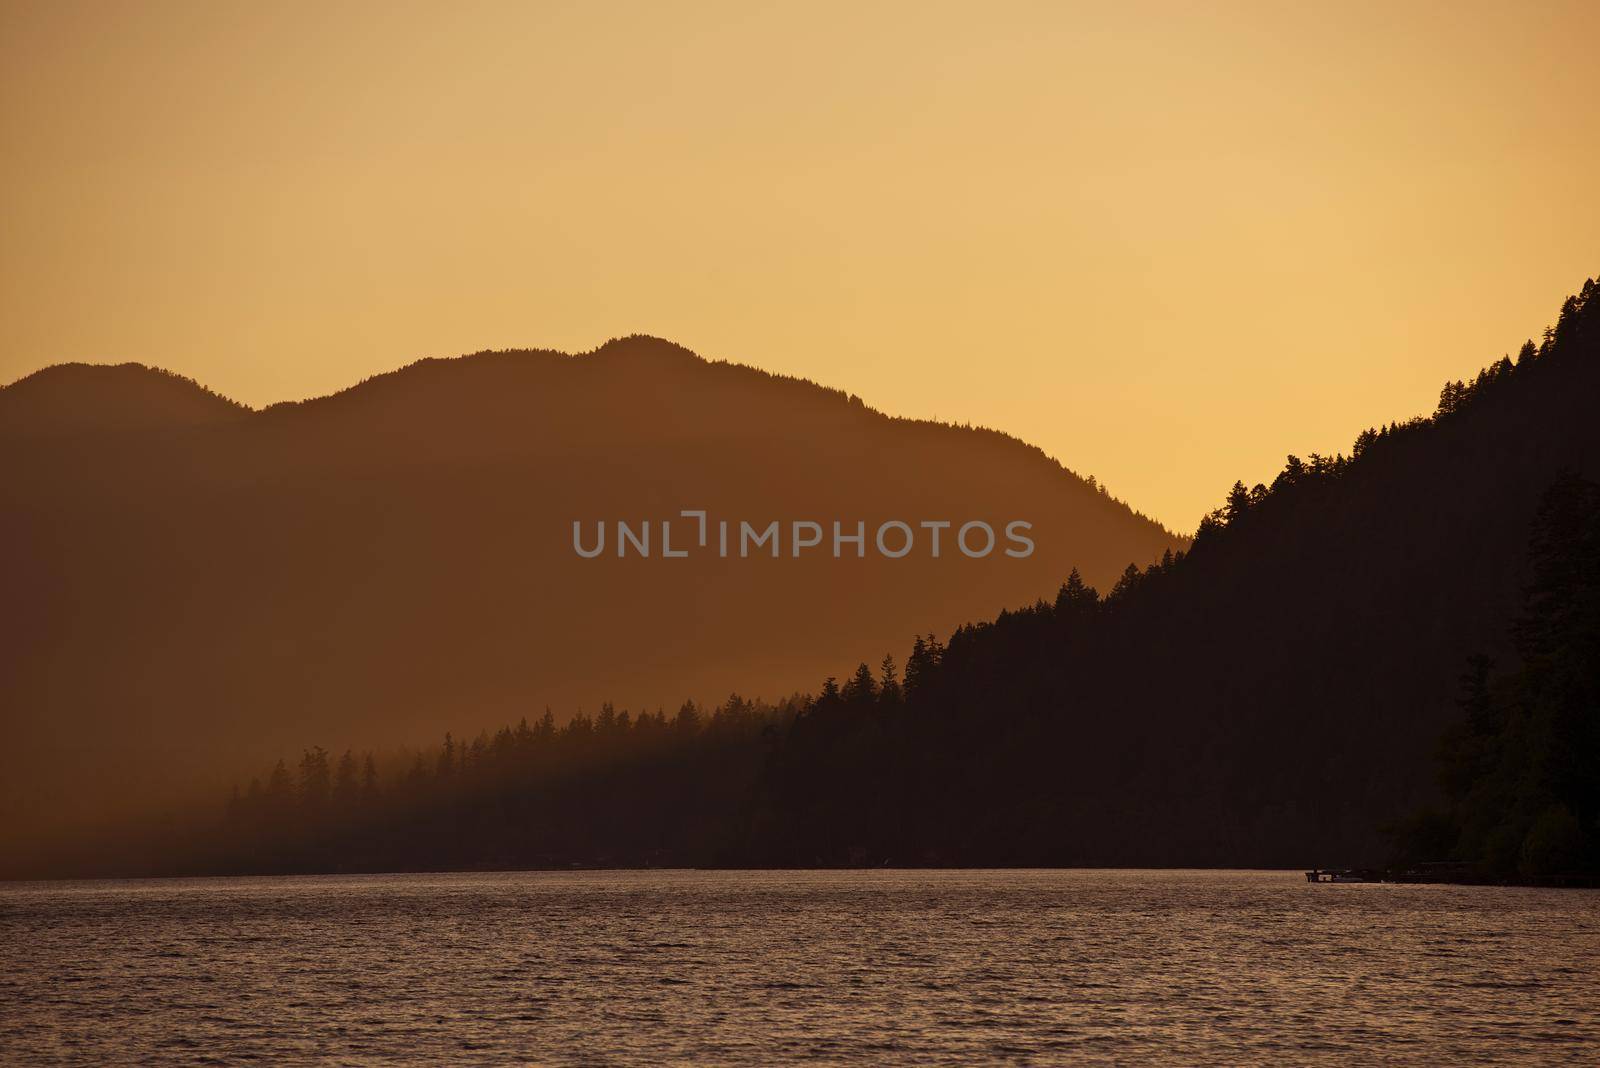 Sunset in the Hills - Lake Crescent Sunset Scenery. Nature Photography Collection. by welcomia